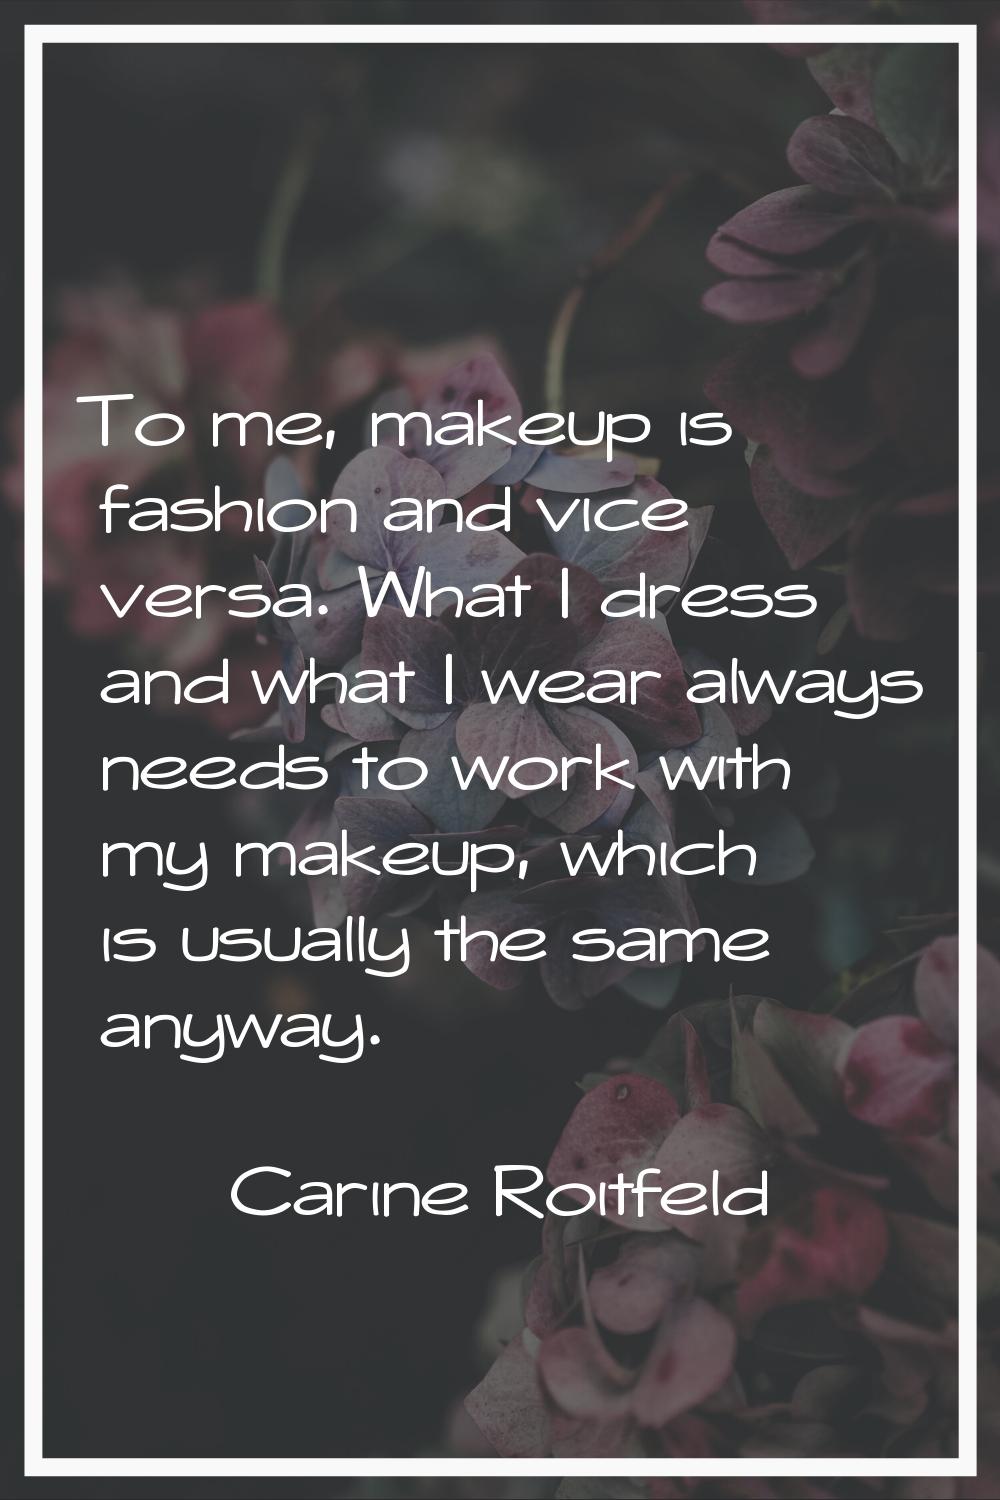 To me, makeup is fashion and vice versa. What I dress and what I wear always needs to work with my 